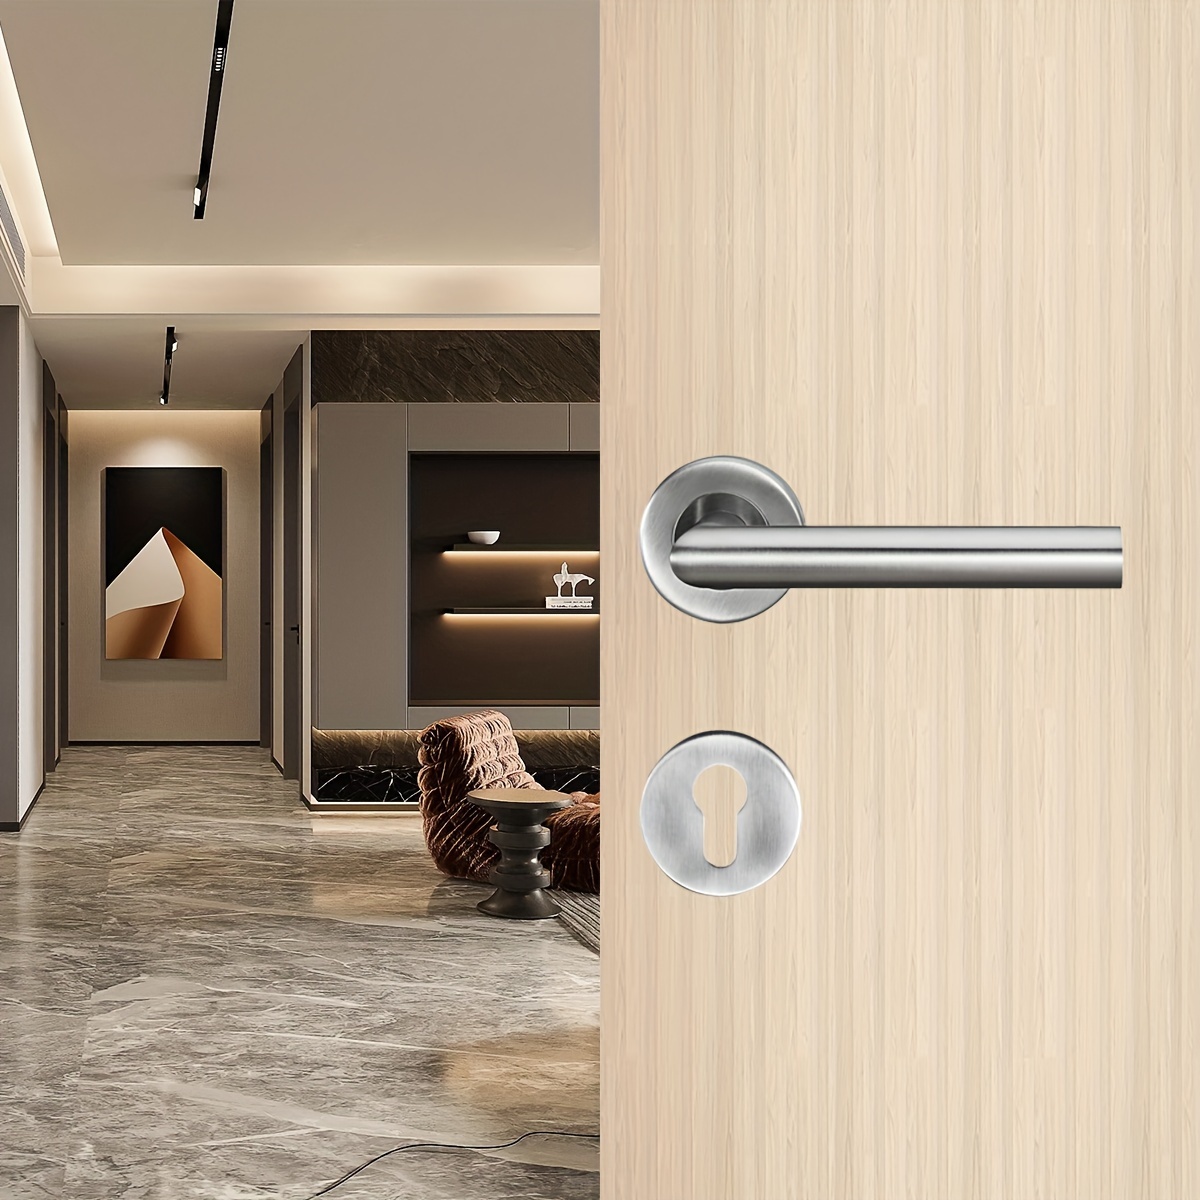 Commercial Door Aluminum Plate-Style Pull Handle, Handlesets